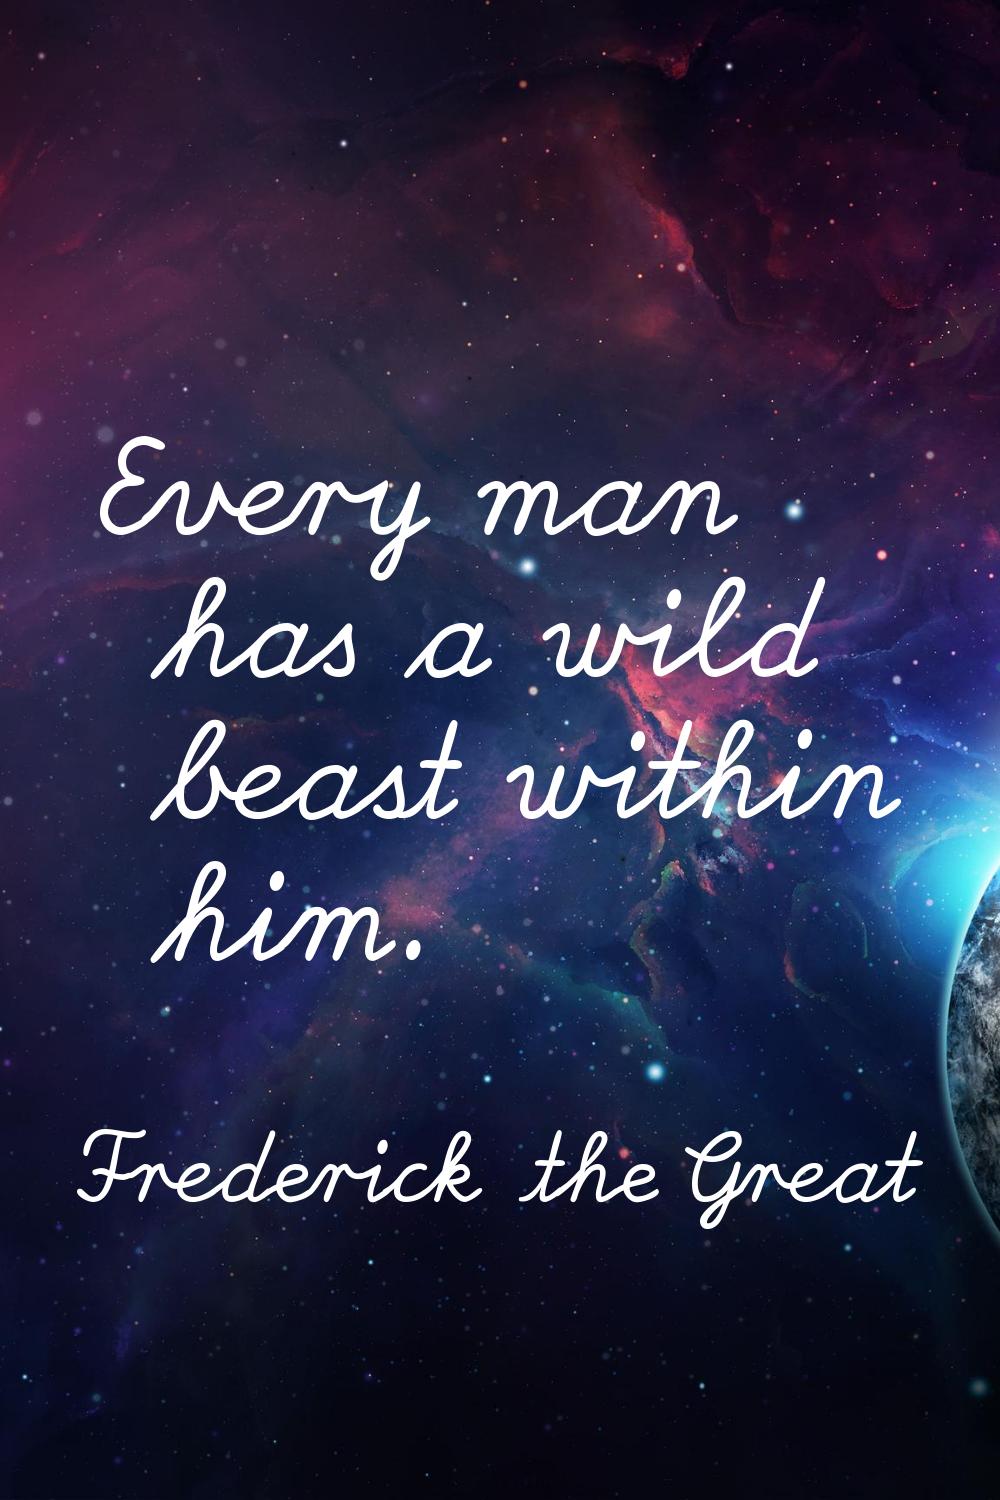 Every man has a wild beast within him.